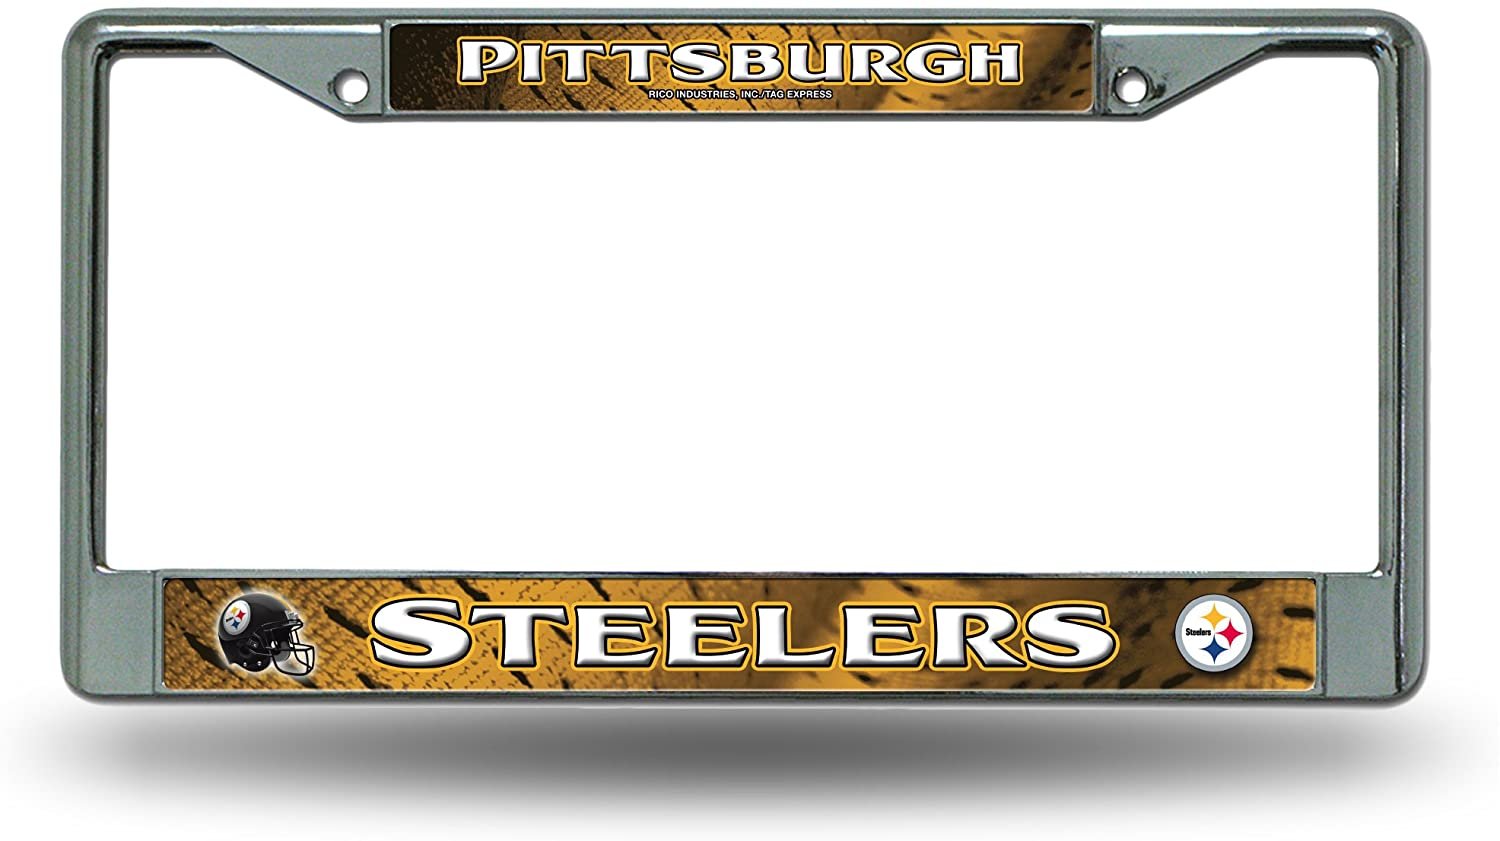 Pittsburgh Steelers Premium Metal License Plate Frame Chrome Tag Cover, 12x6 Inch